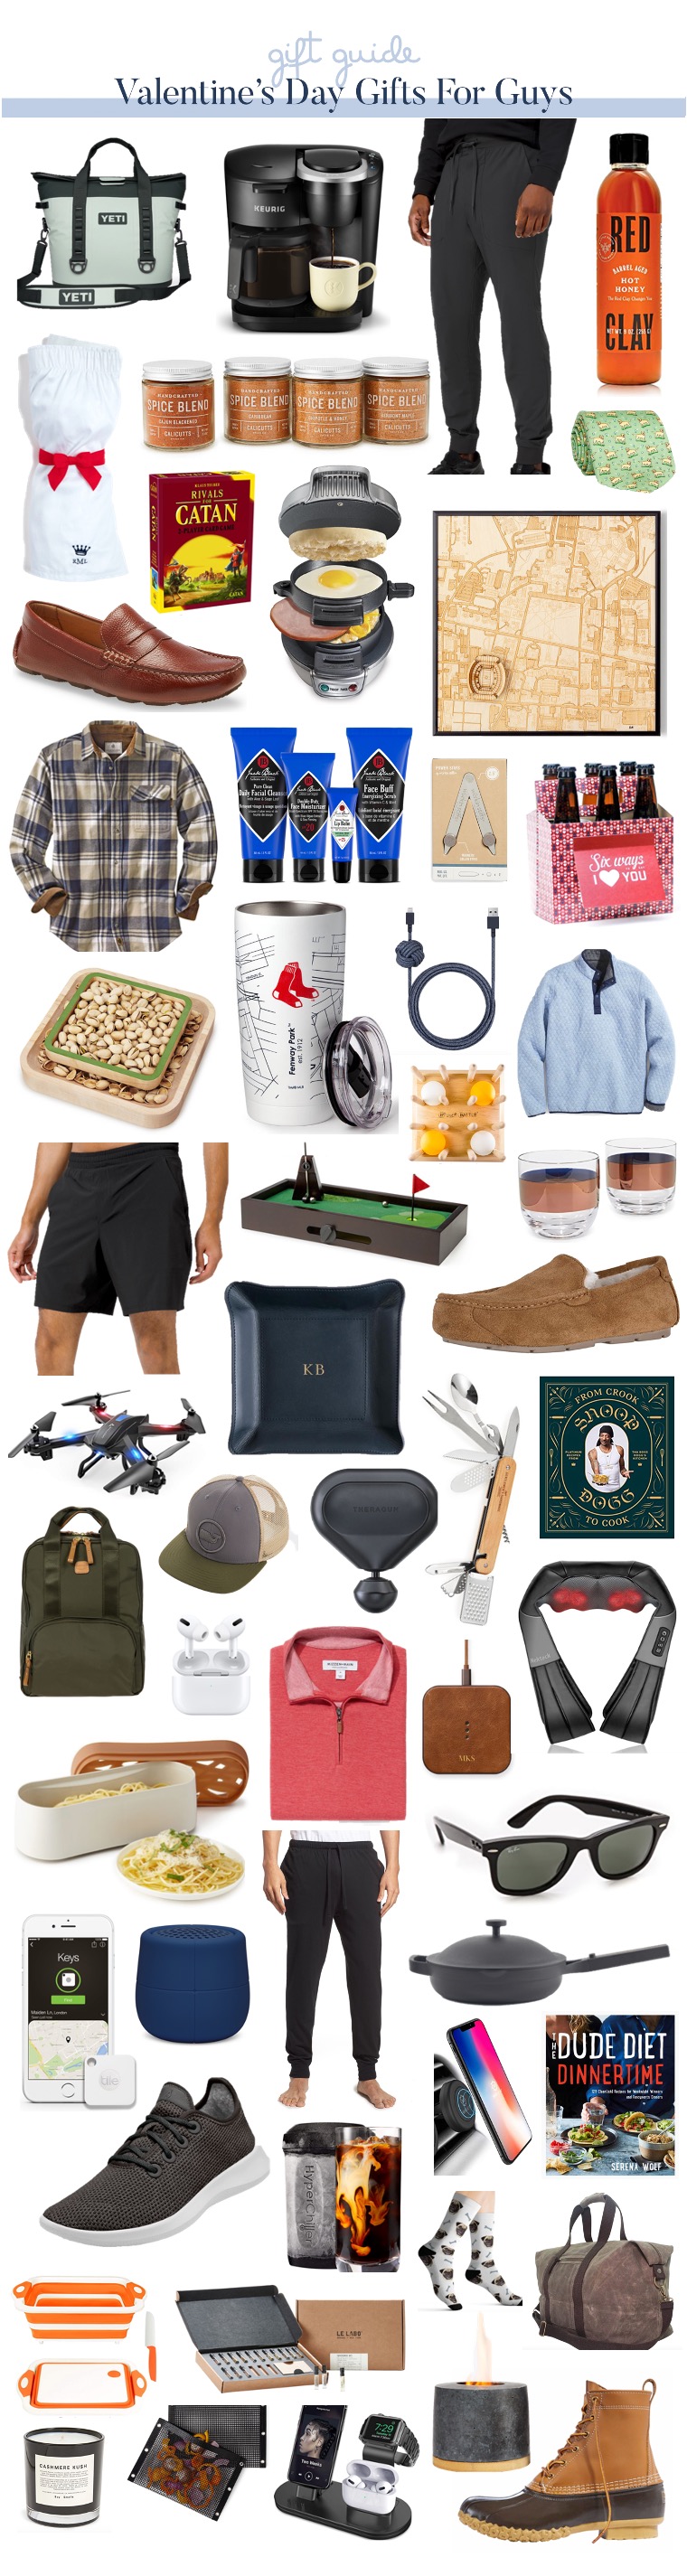 Valentine Gift Ideas for Him - What to Get a Guy for Valentine's Day